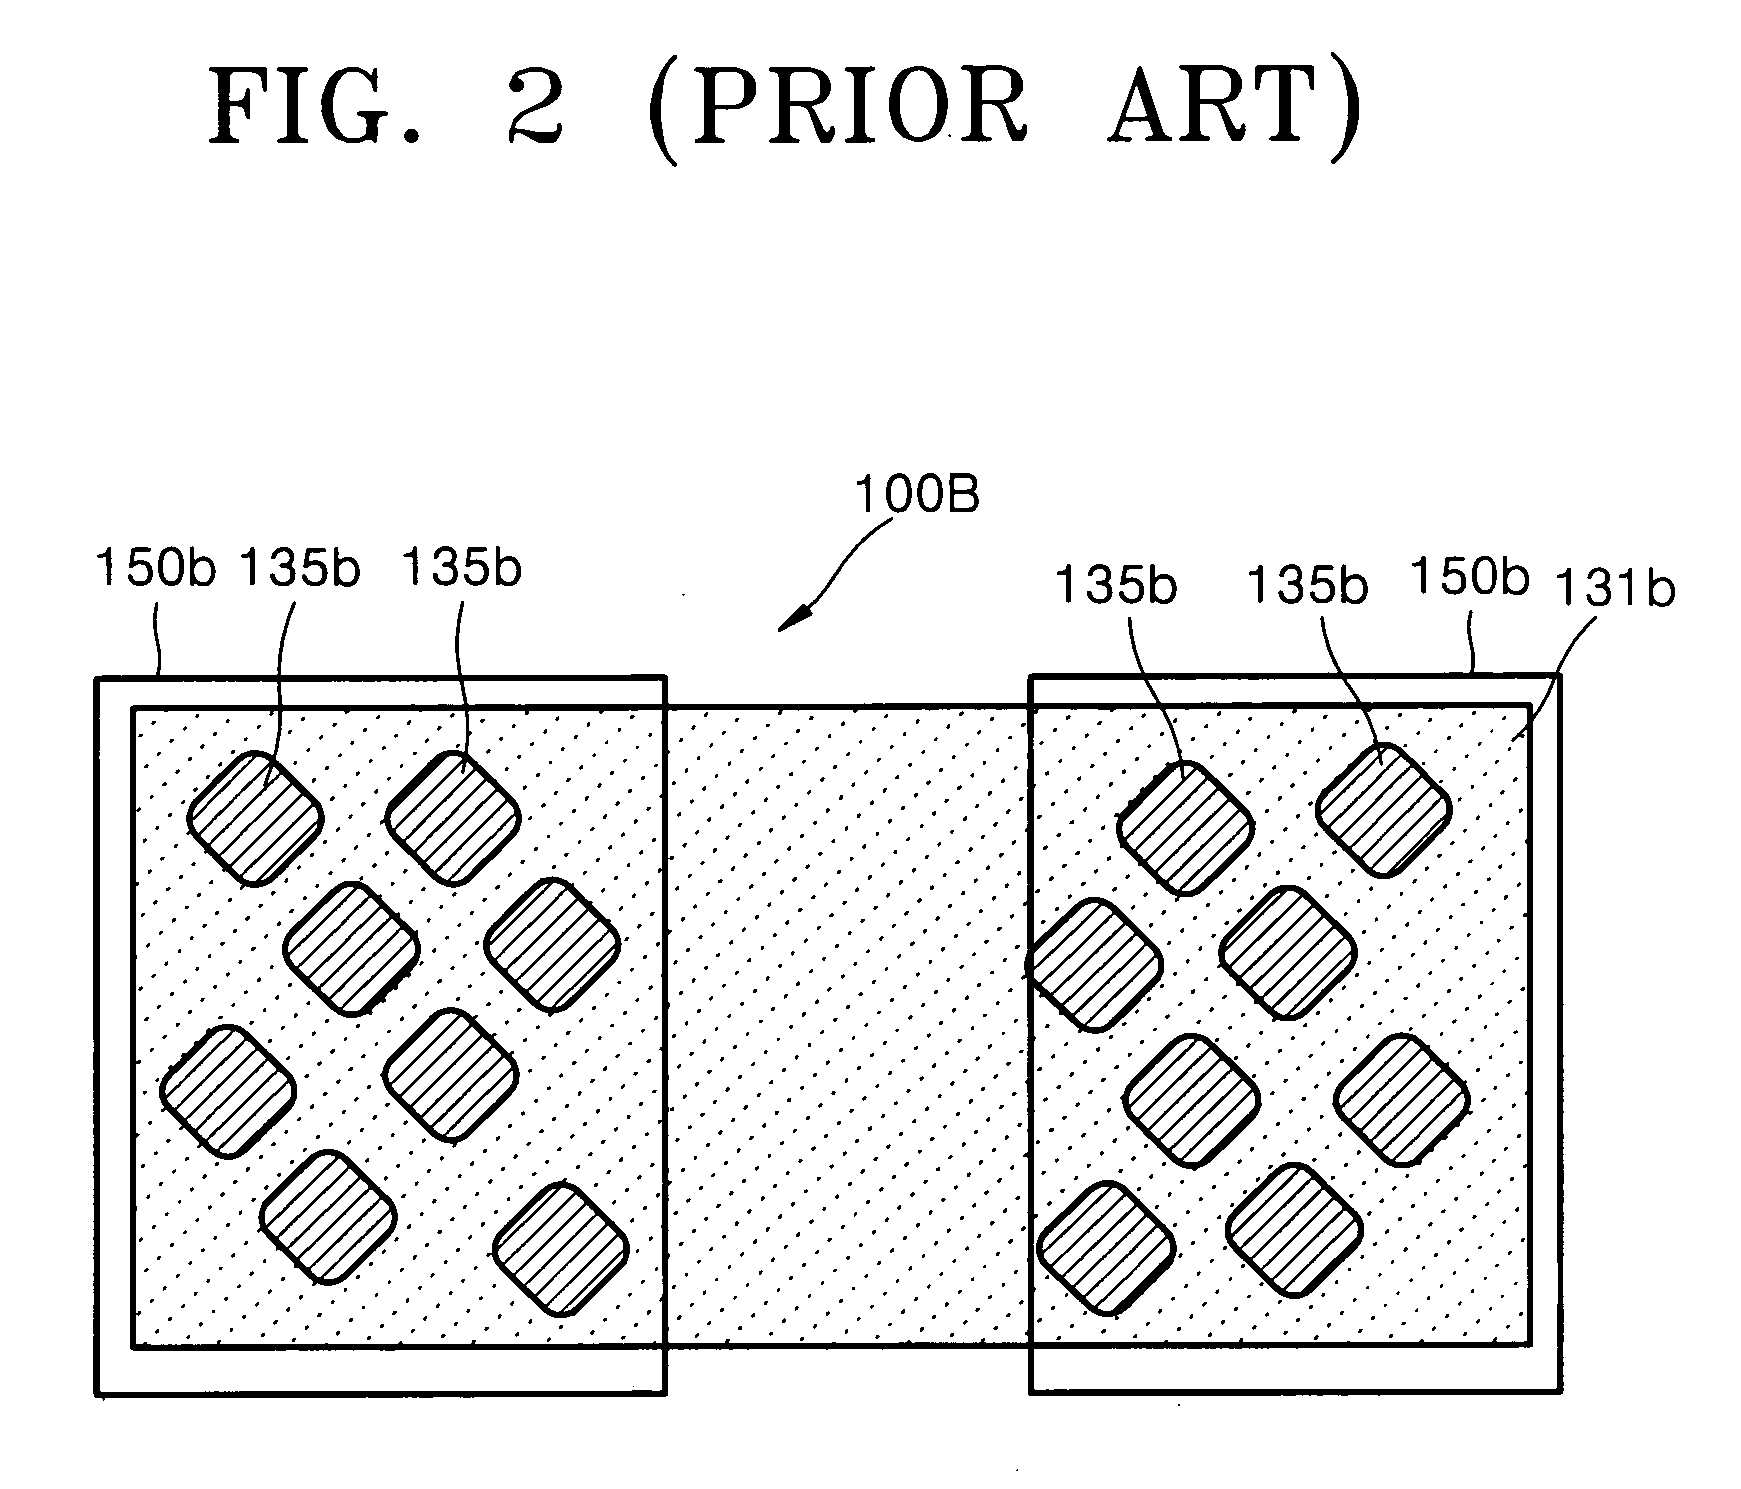 Semiconductor memory device having a decoupling capacitor